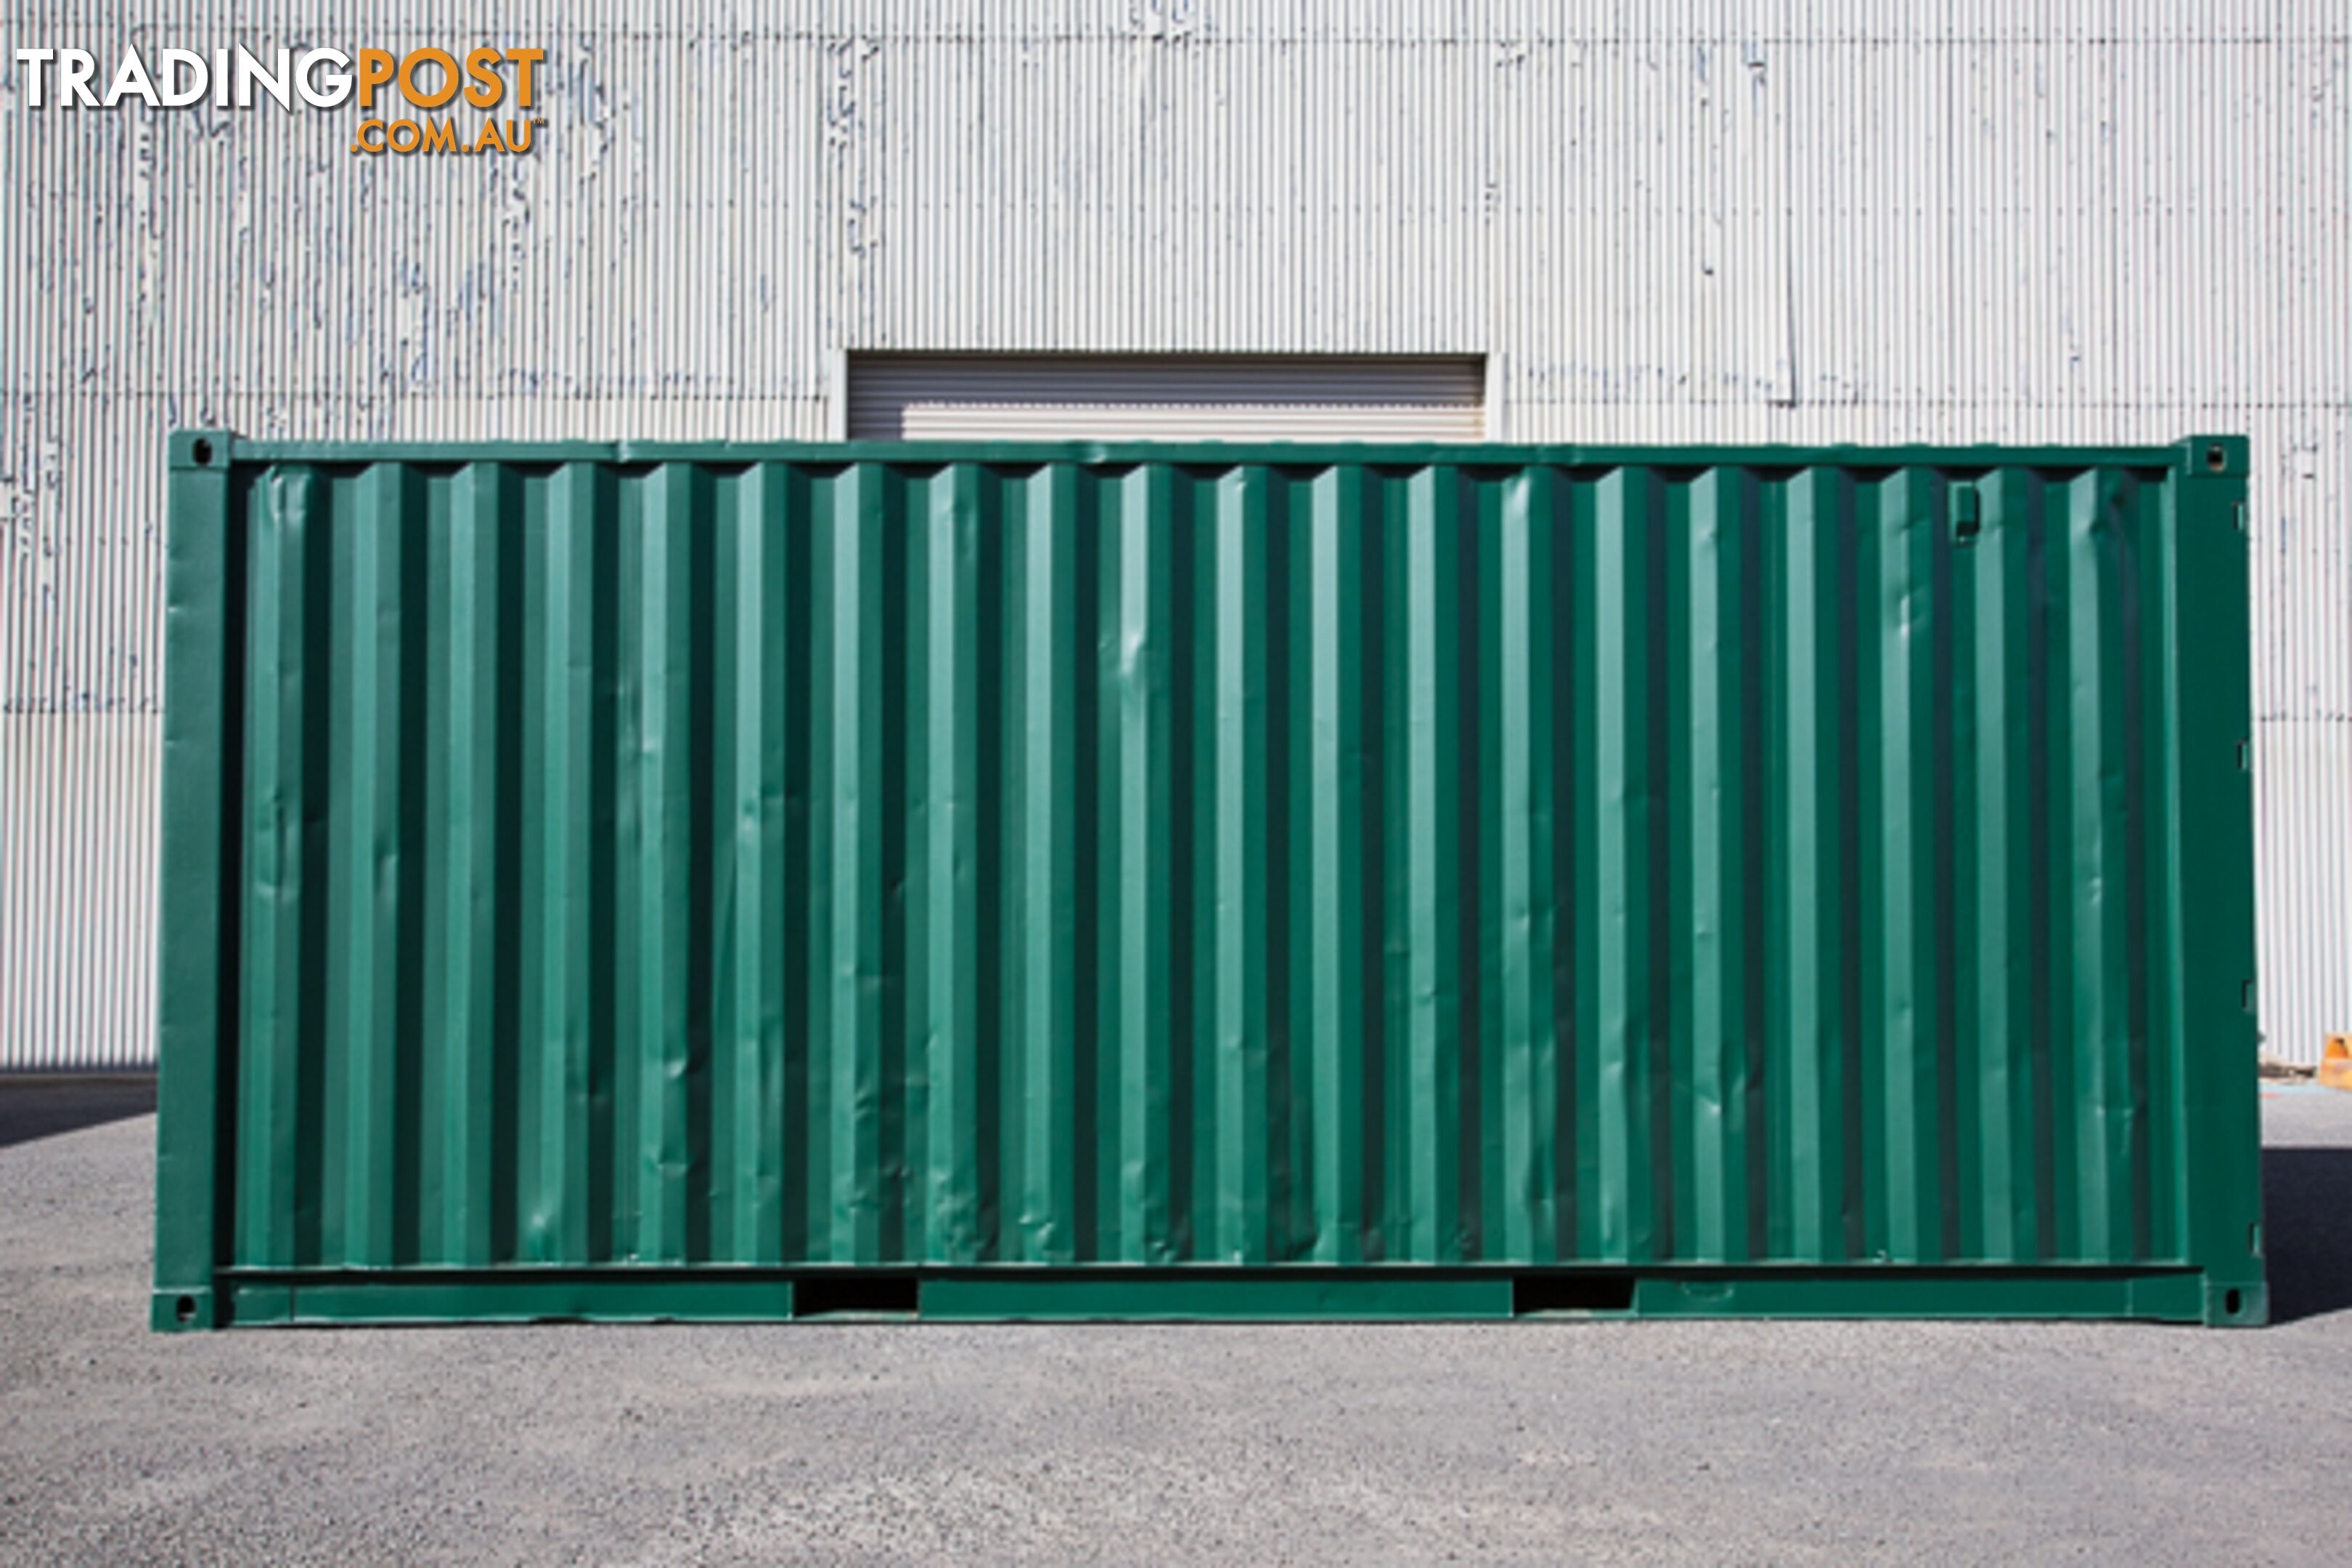 Refurbished Painted 20ft Shipping Containers Toronto - From $4350 + GST